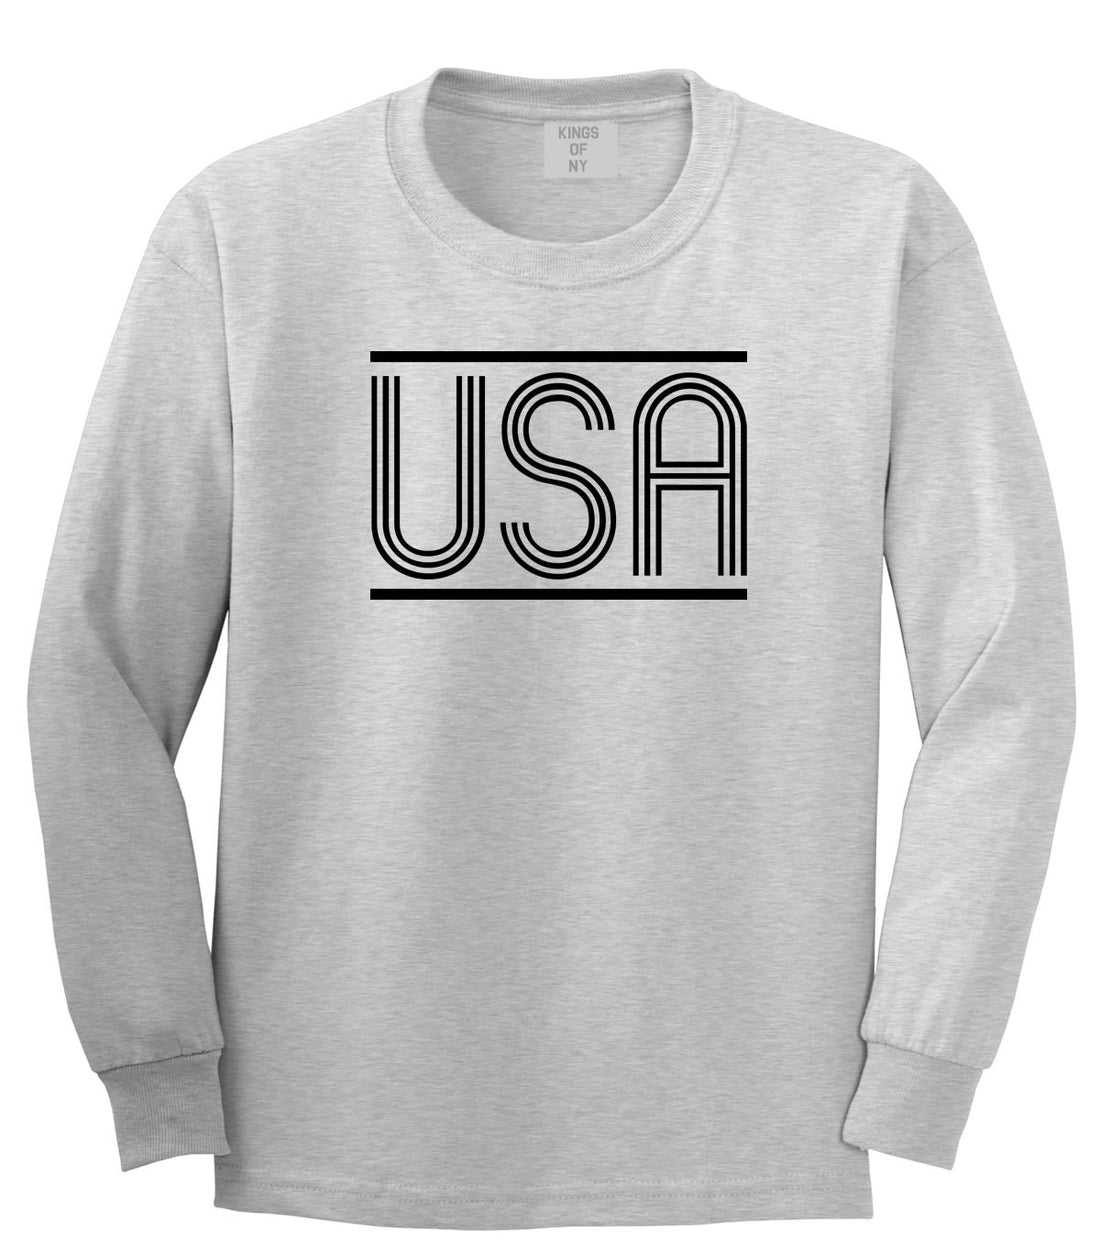 USA America Fall15 Long Sleeve T-Shirt in Grey by Kings Of NY